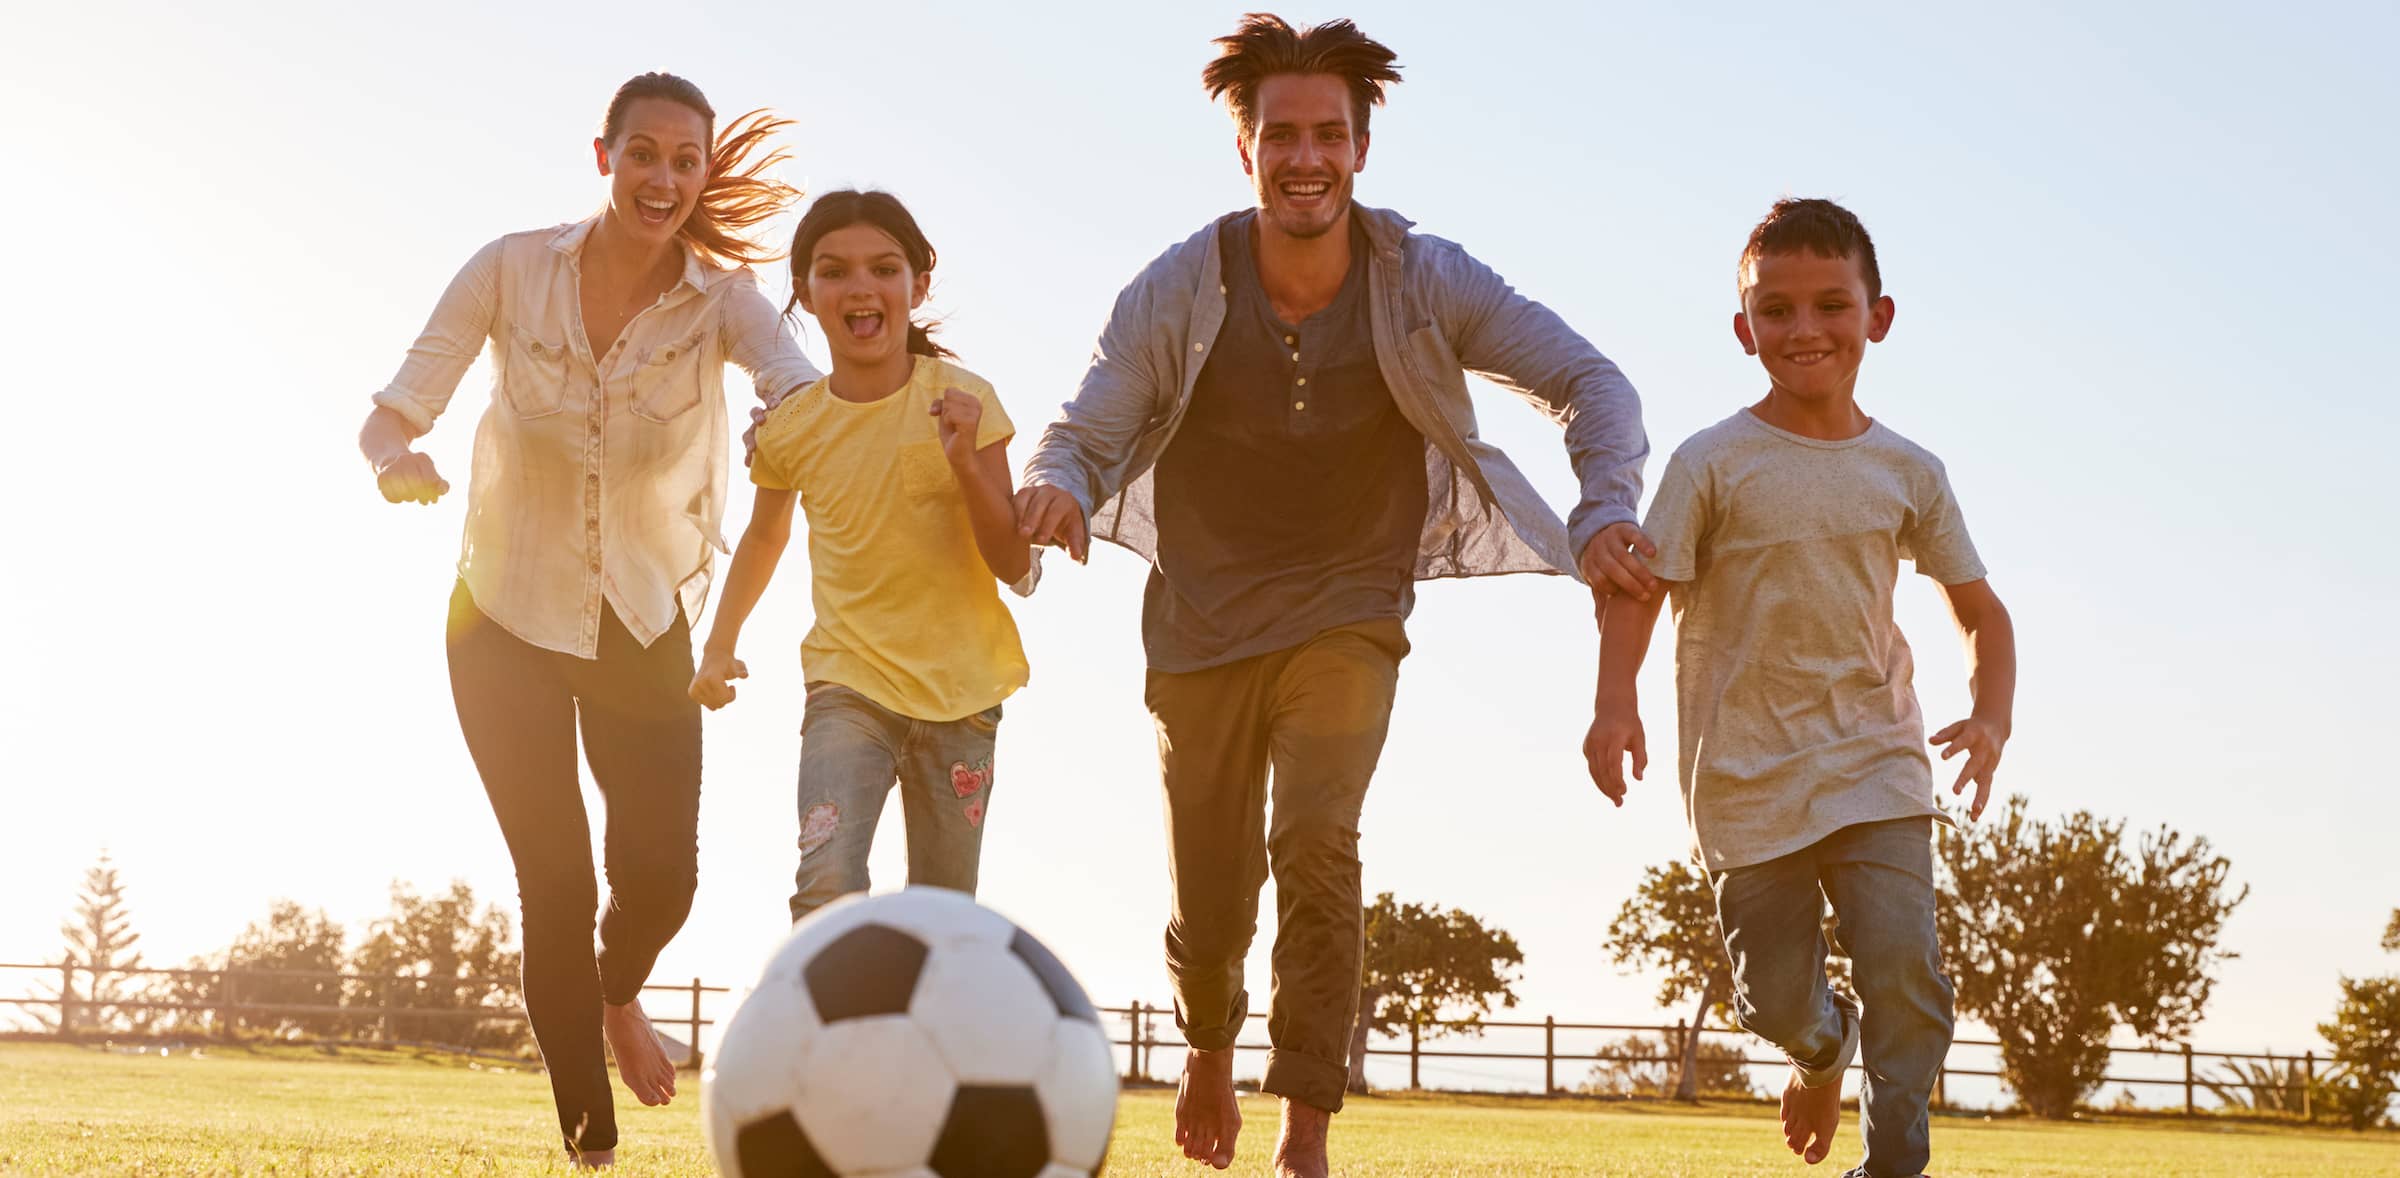 Families encouraged to get active during fifa world cup with #halftimechallenge